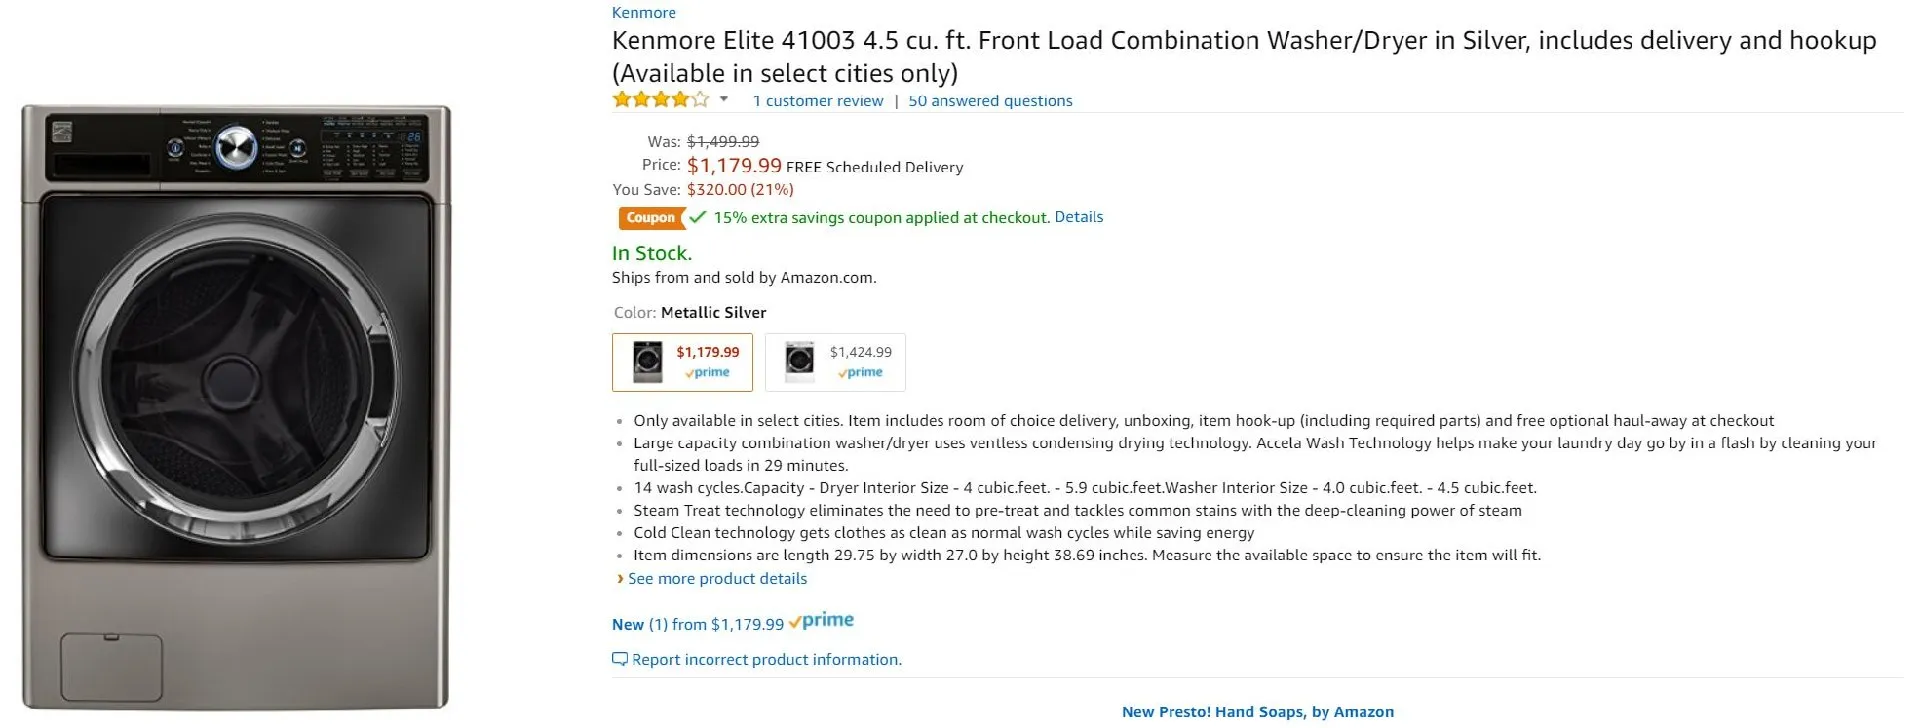 All-In-One Washer and Dryer by Kenmore Deal